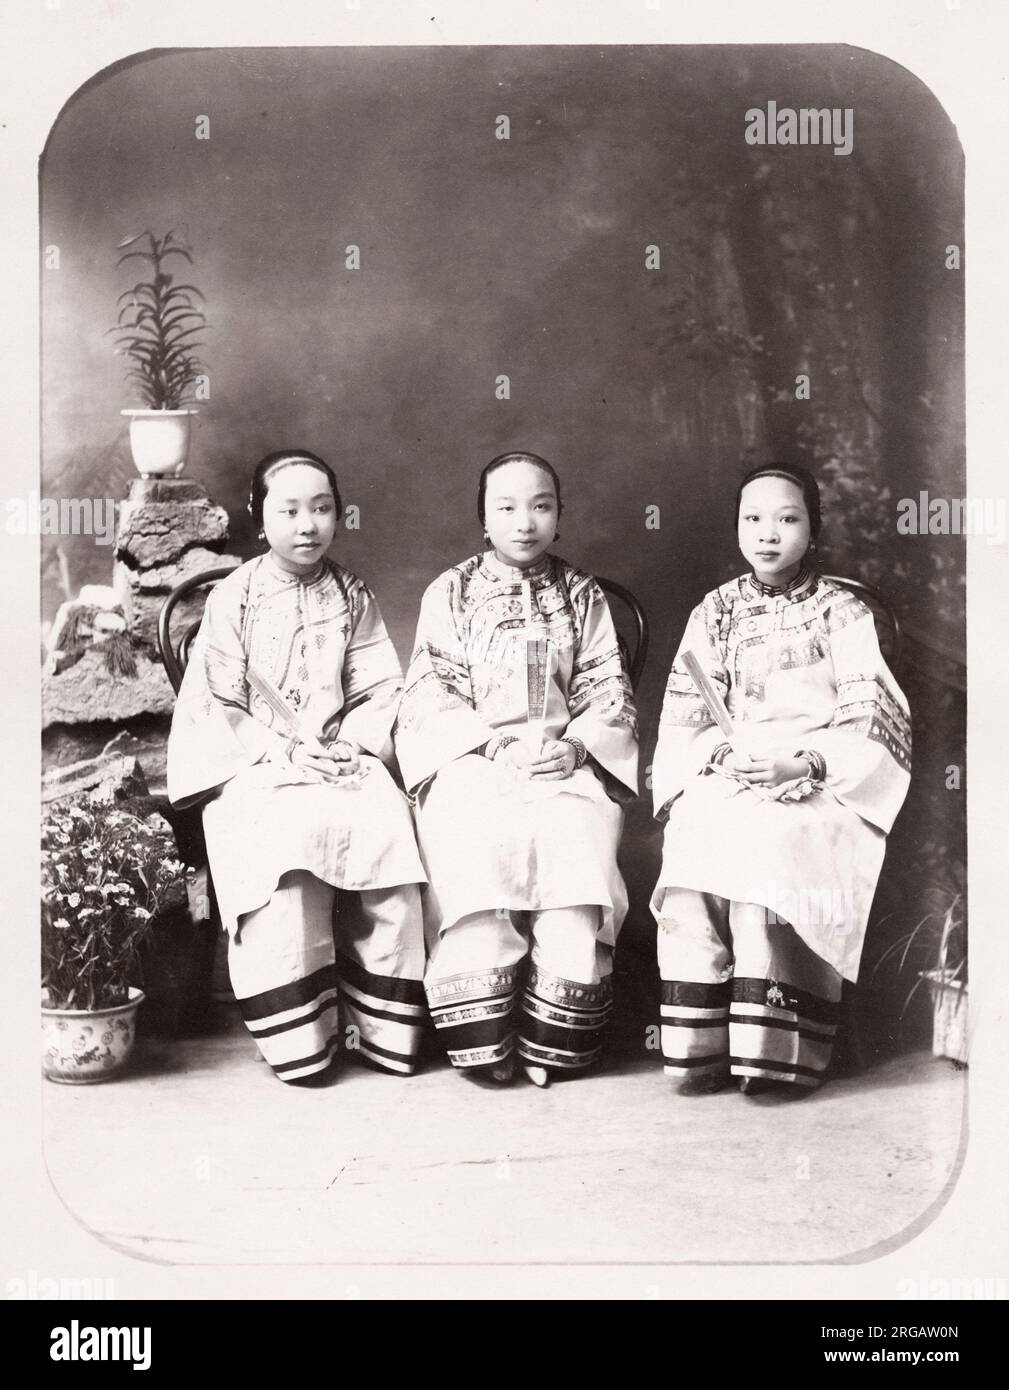 Vintage late 19th century photograph: Three Chinese women with bound feet, China. Stock Photo